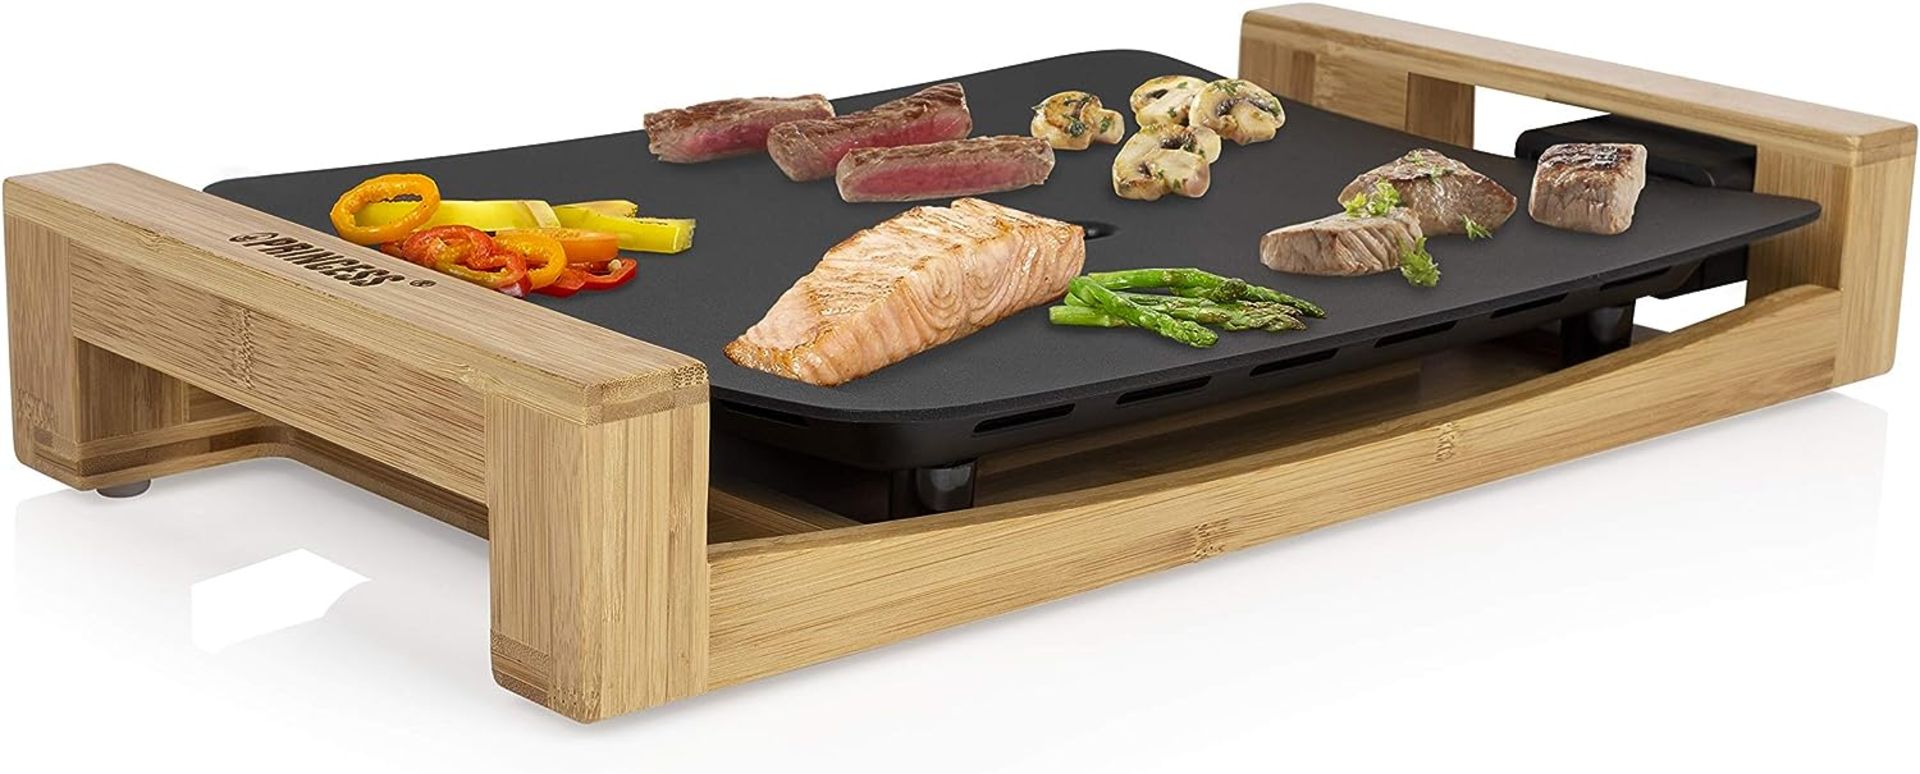 BRAND NEW PRINCESS BAMBOO AND BLACK ELECTRIC TABLE GRILL RRP £149 R3-1